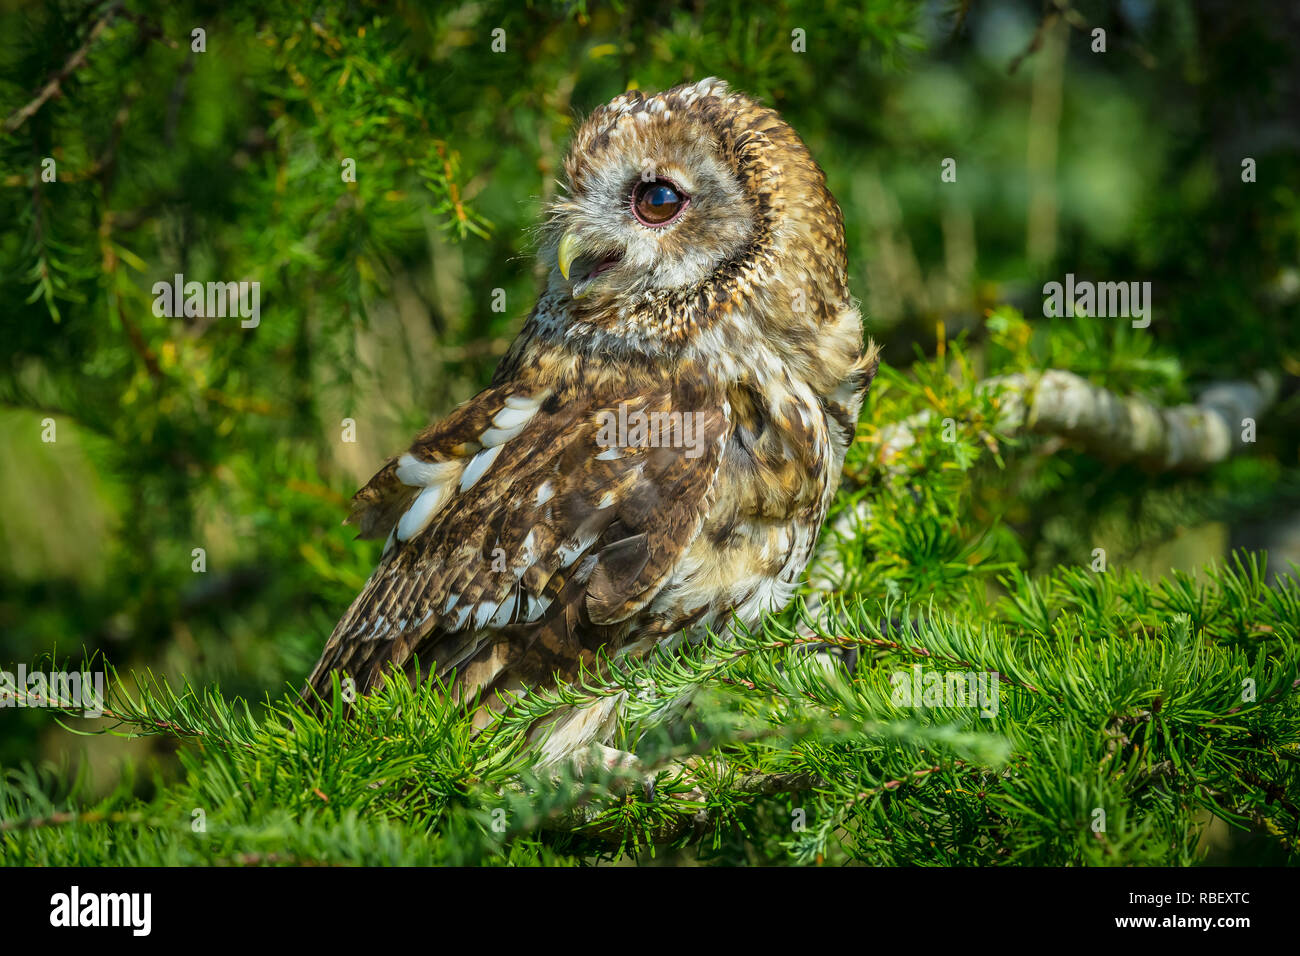 Tawny owl (Scientific name: Strix aluco) perched in coniferous woodland, looking to the left with one eye showing which has a star in the eye. Stock Photo